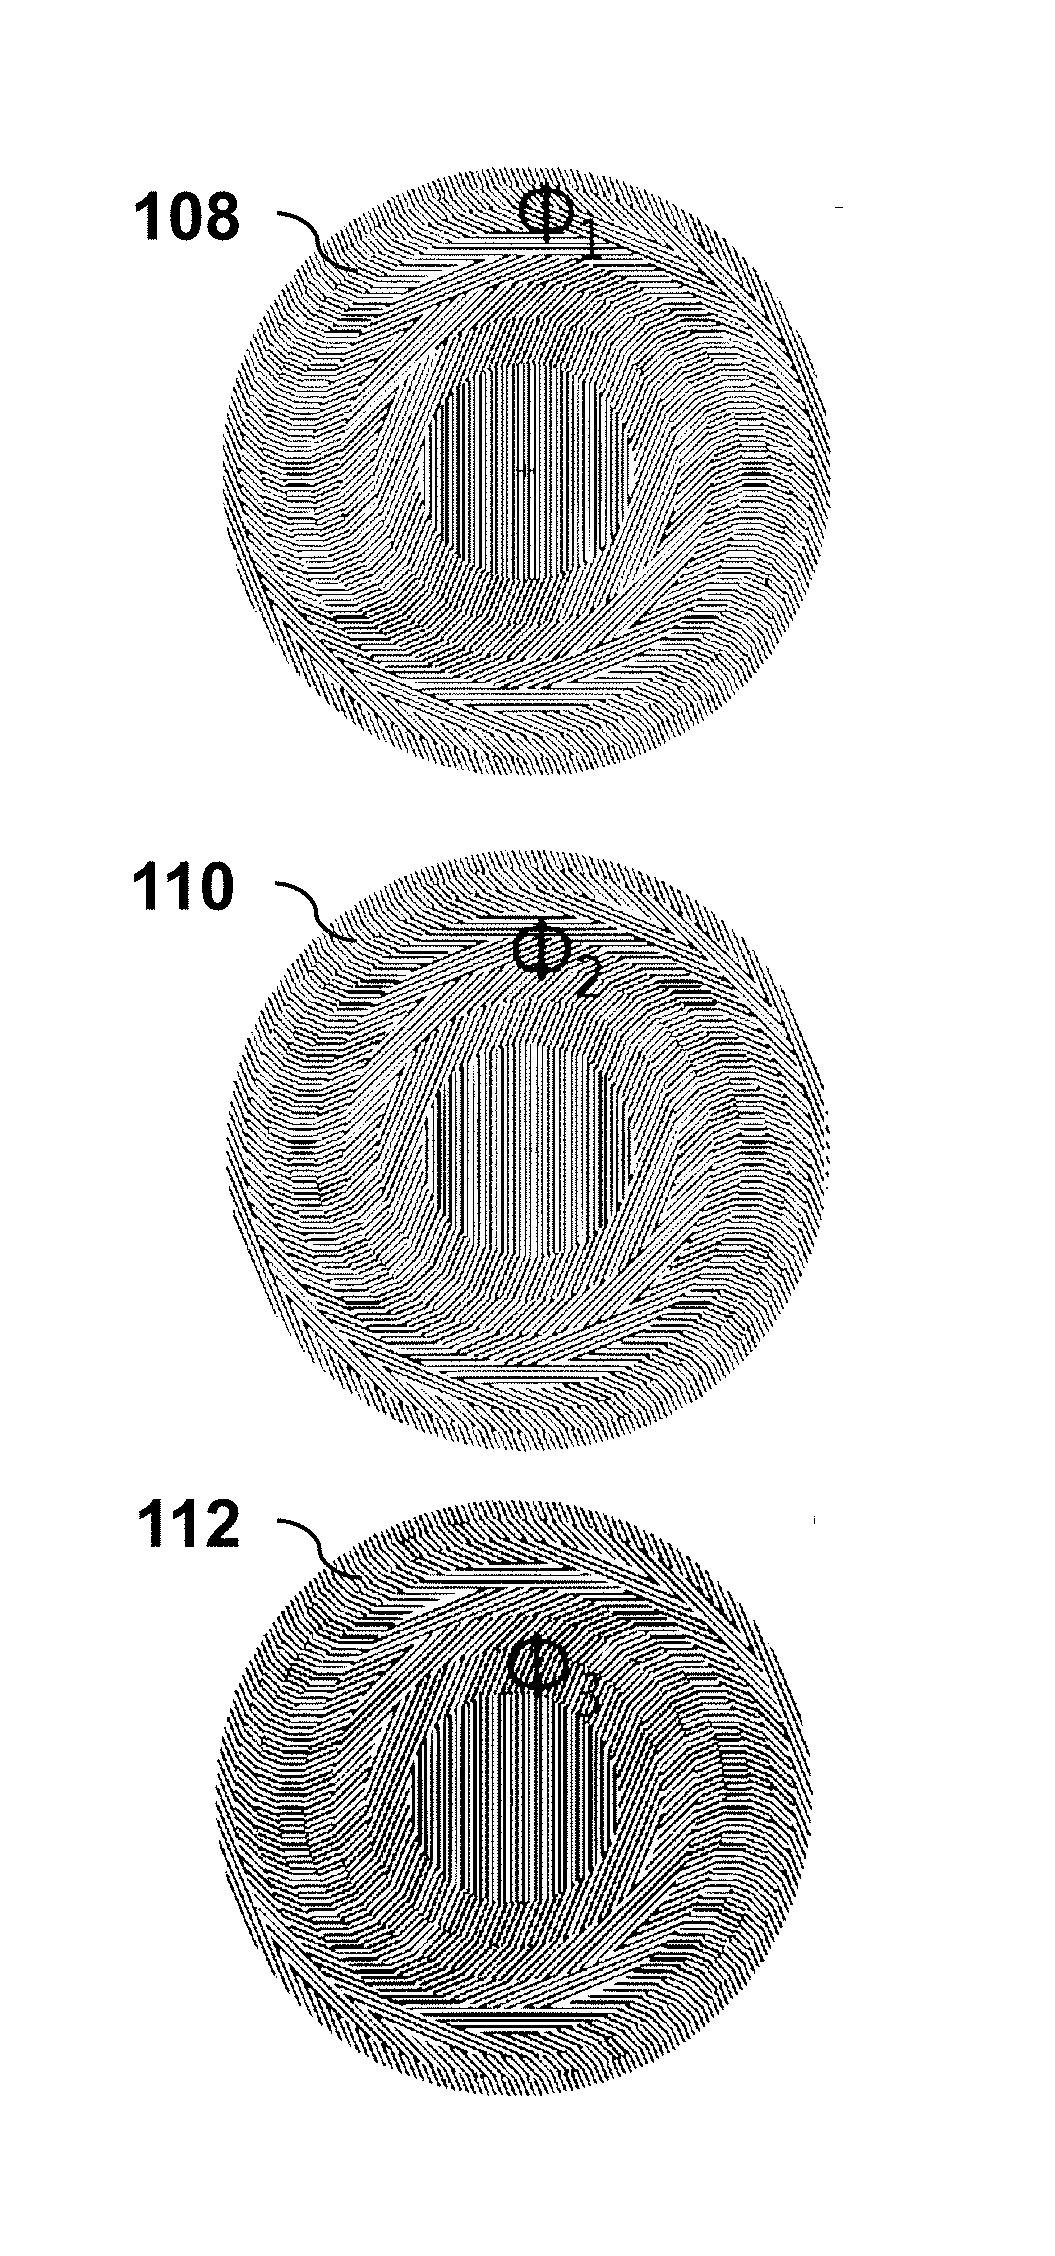 Spatially Multiplexed Dielectric Metasurface Optical Elements